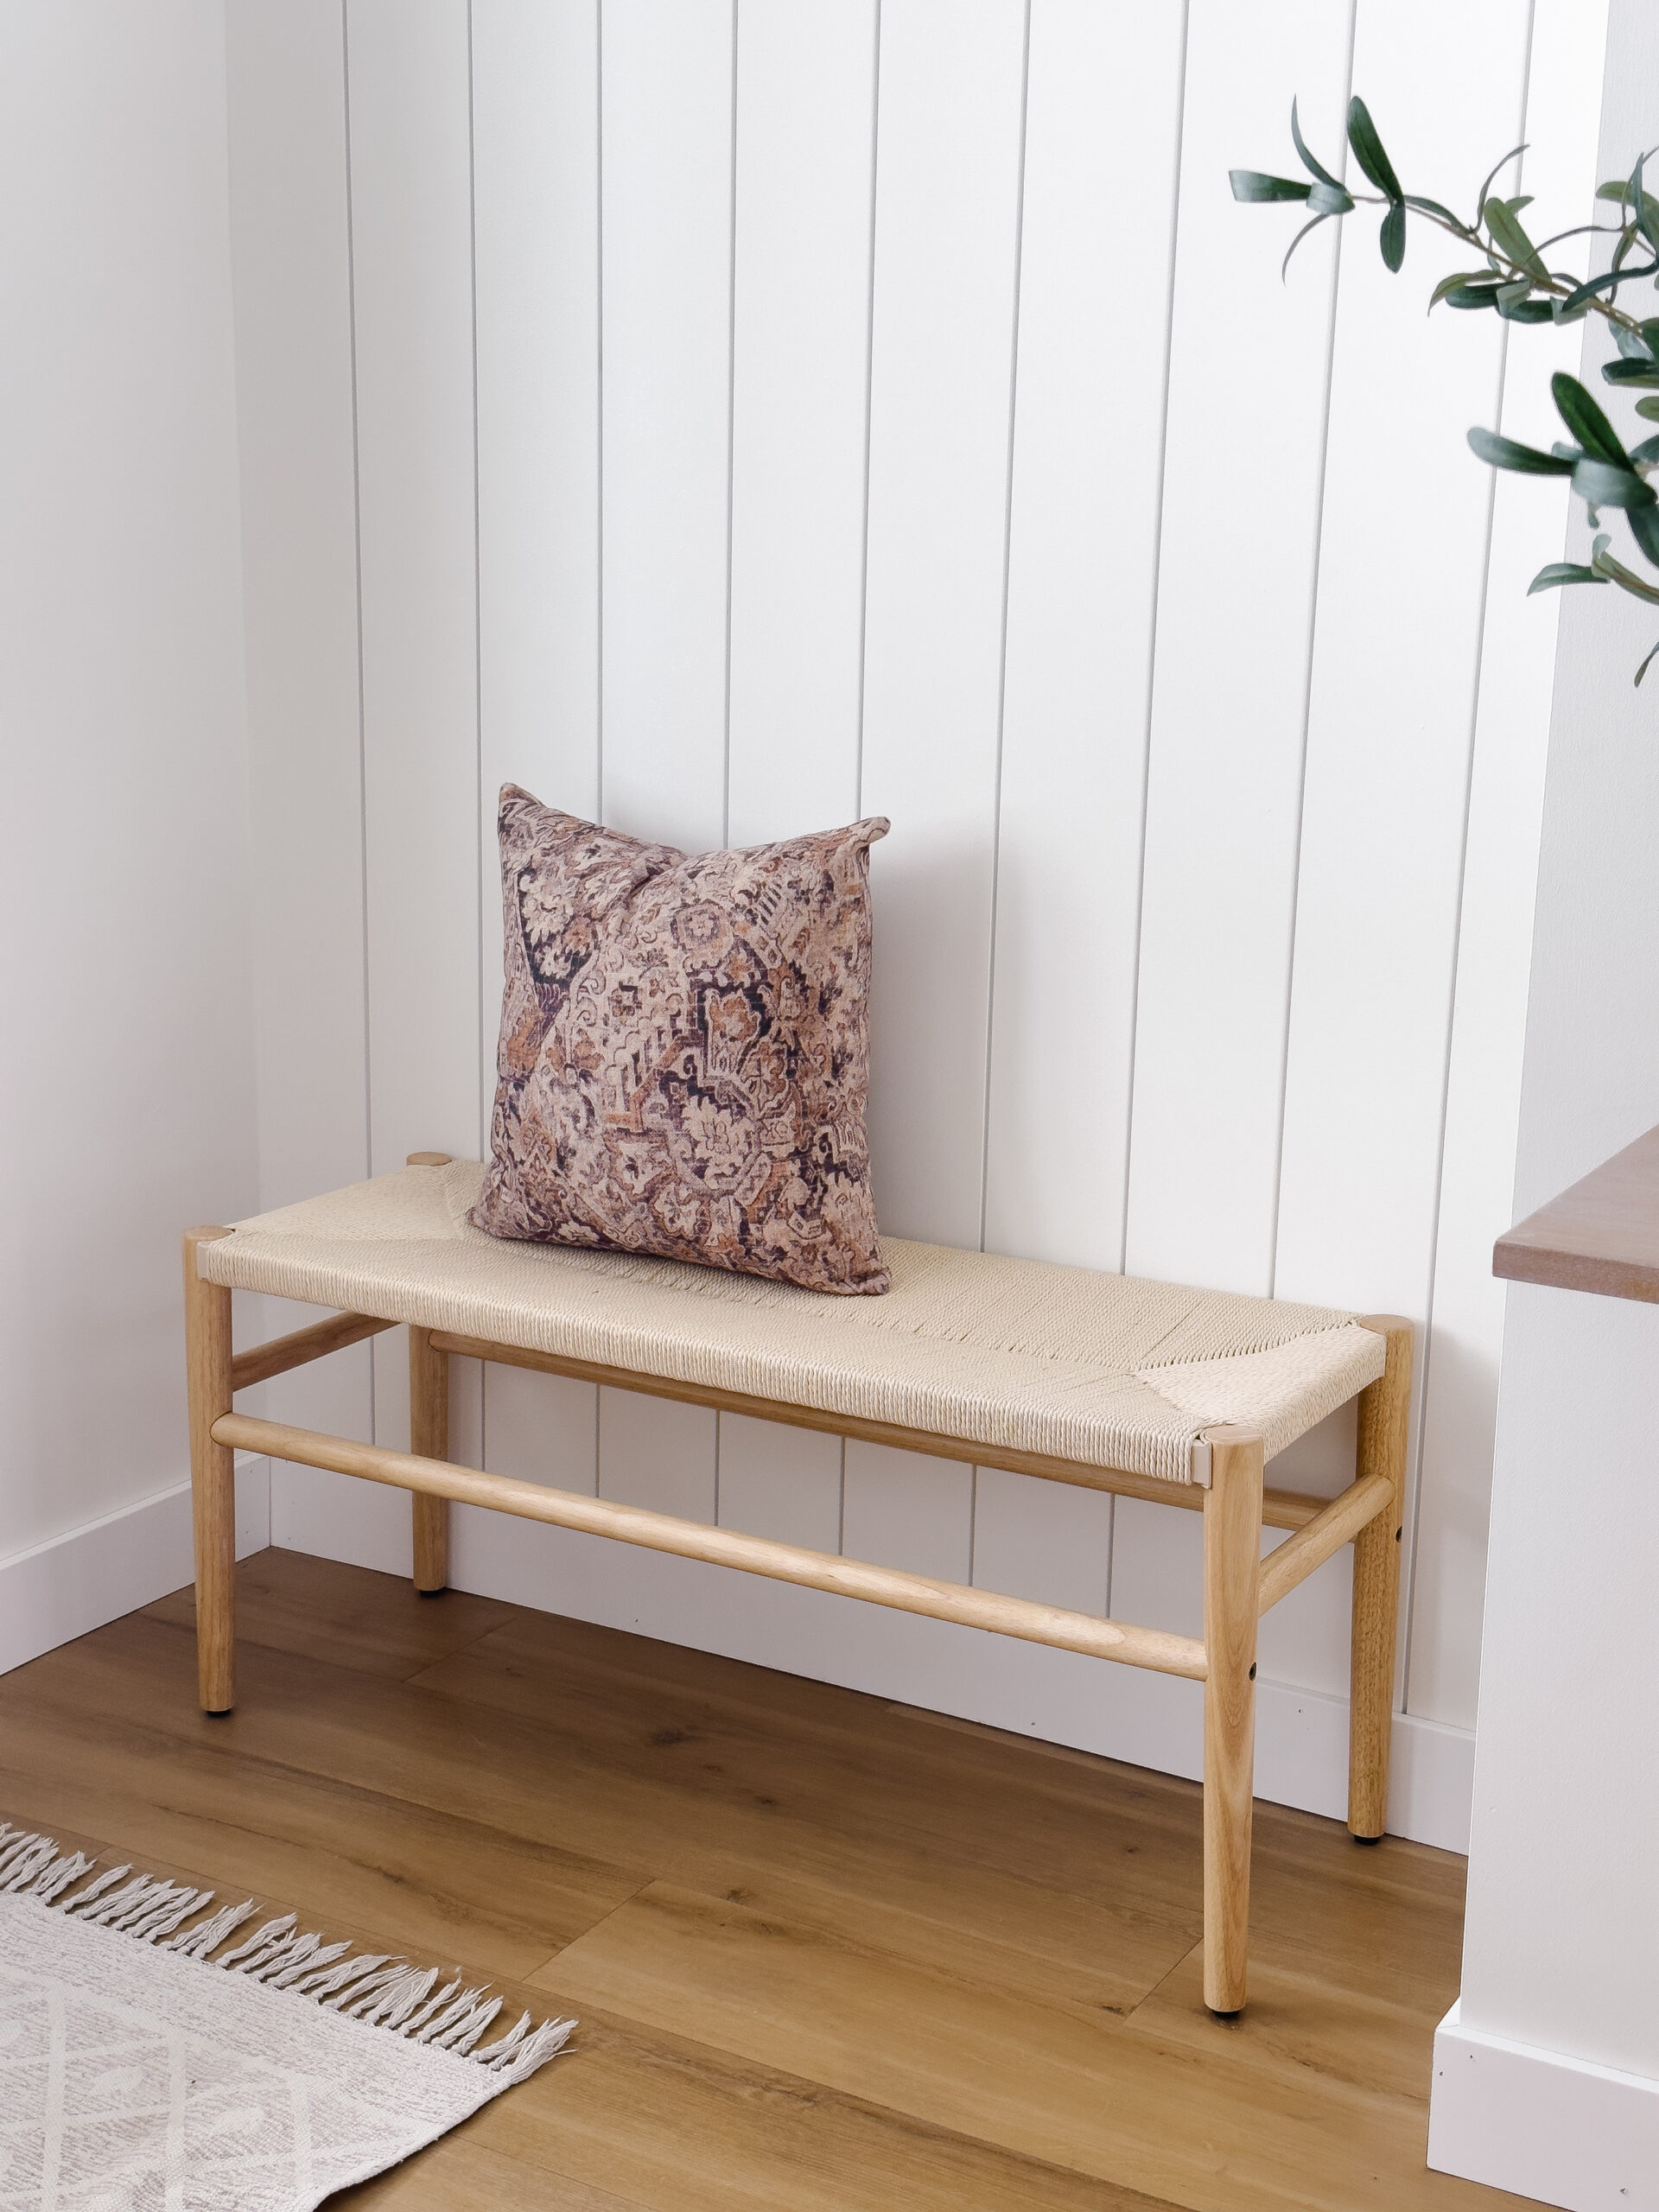 modern wicker bench with pillow in entrance nook